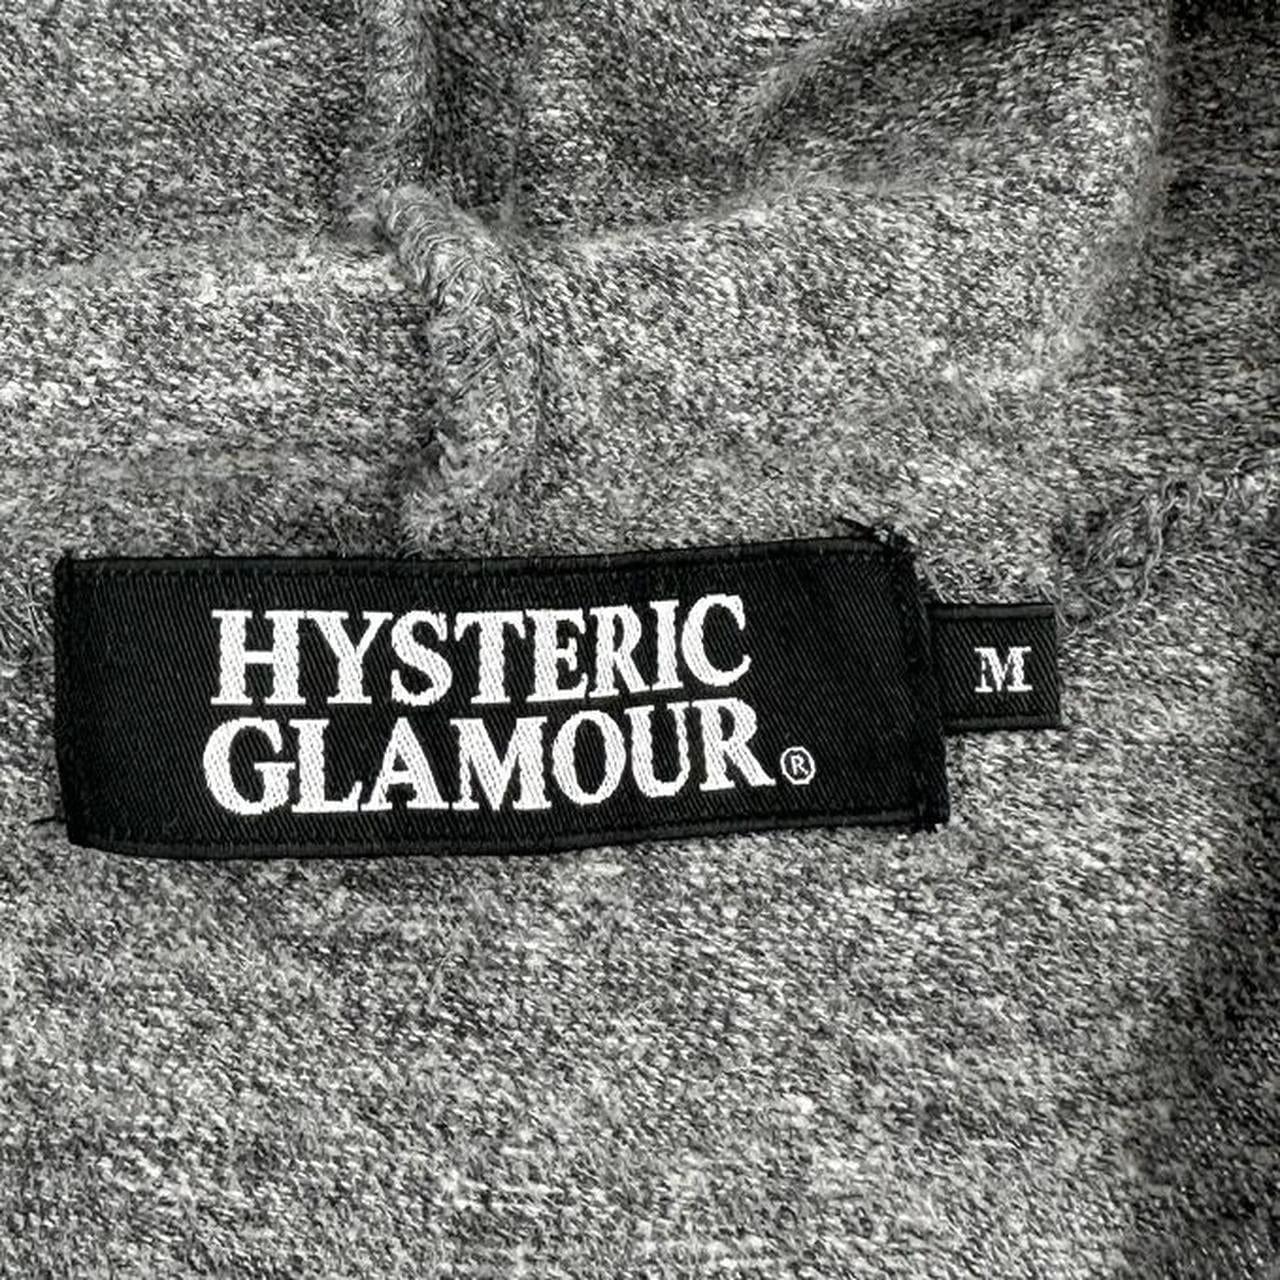 Hysteric Glamour hoodie woman’s size M - Known Source